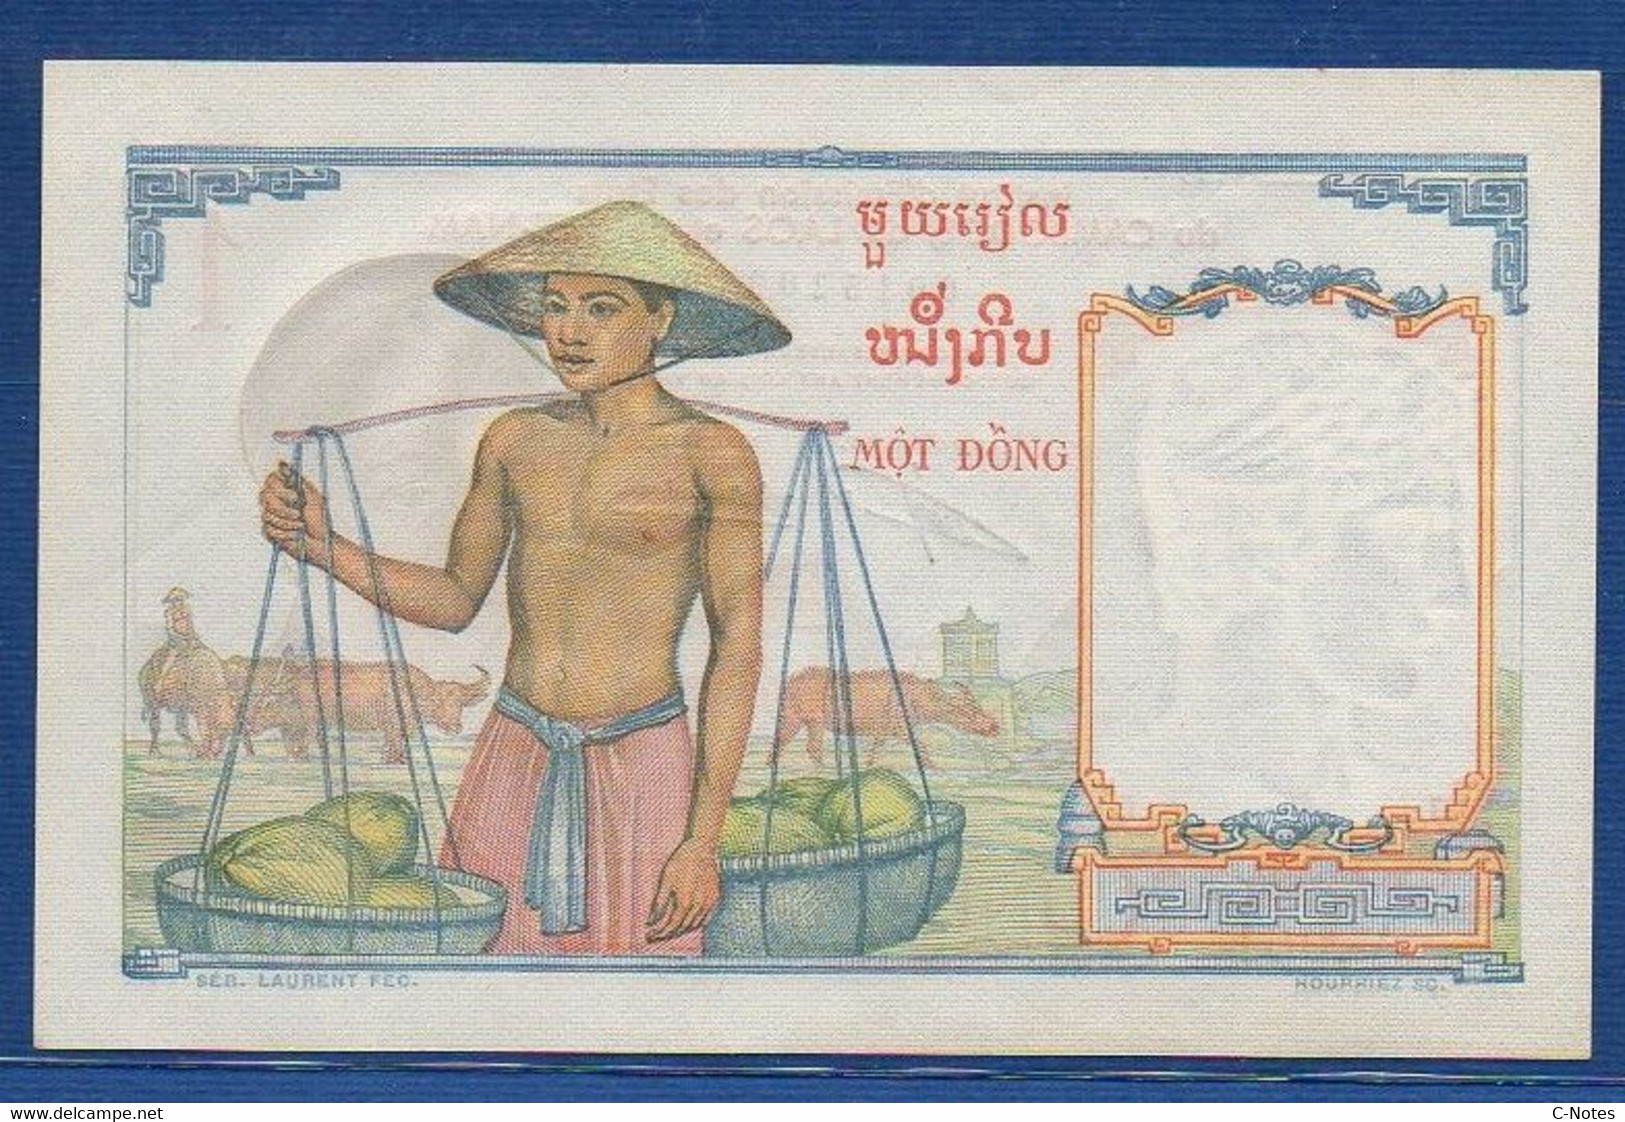 FRENCH INDOCHINA - P. 92 –  1 Piastre ND (1953) UNC-, S/n V.061 910 - Indocina